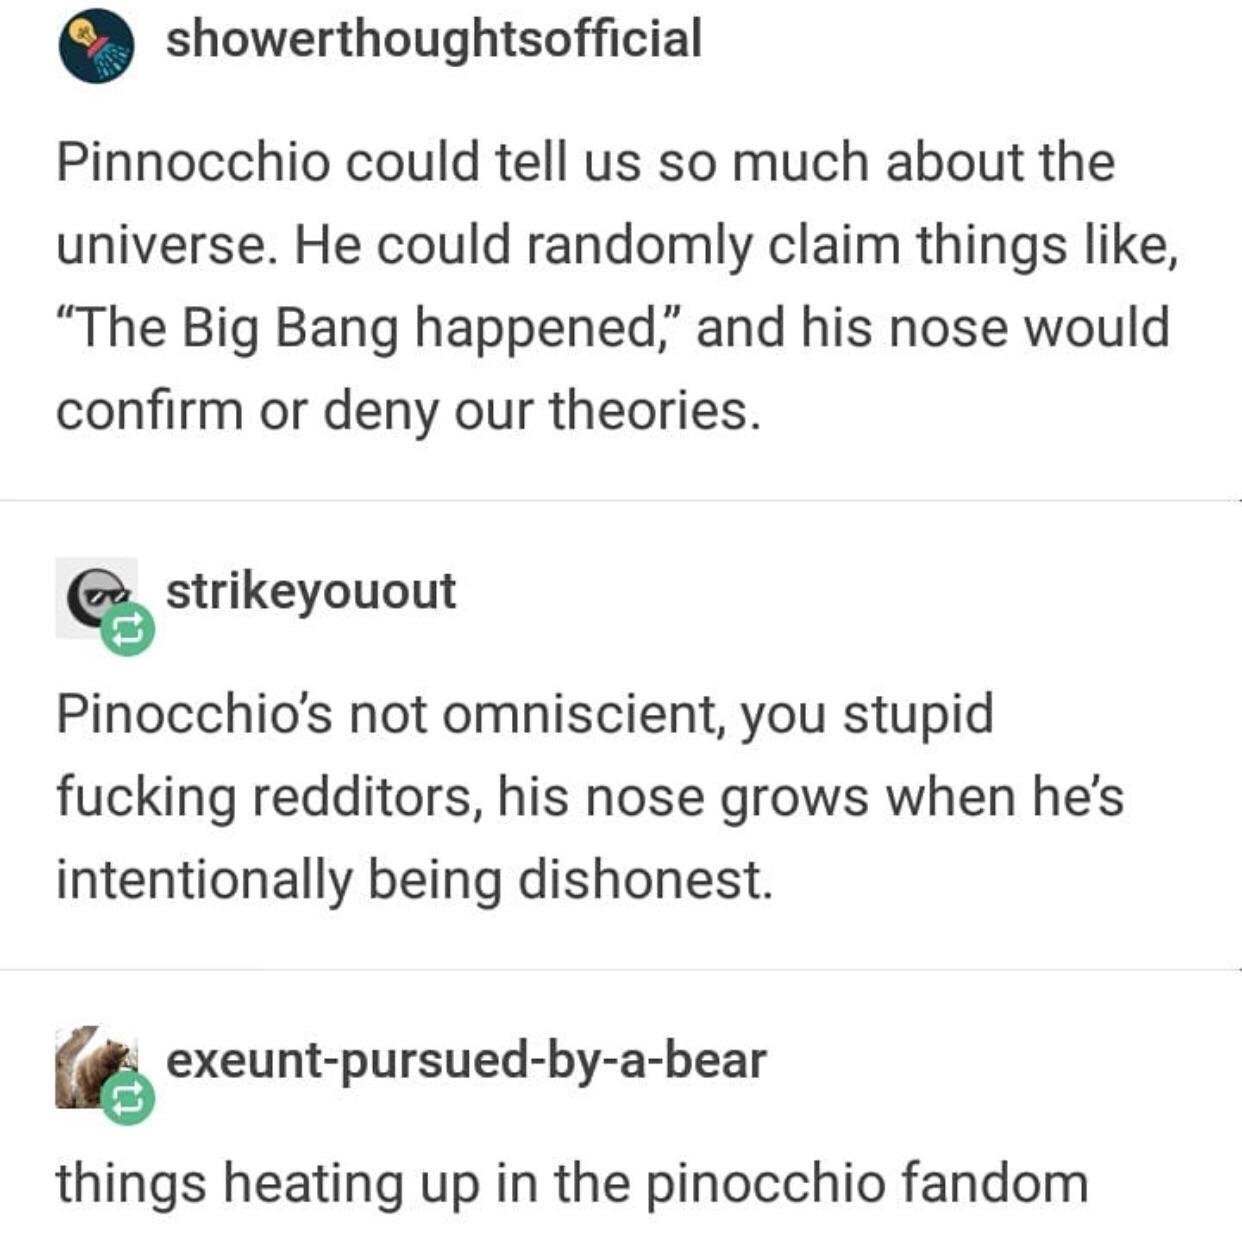 dankness of pinocchio fandom - showerthoughtsofficial Pinnocchio could tell us so much about the universe. He could randomly claim things , The Big Bang happened," and his nose would confirm or deny our theories. Pa strikeyouout Pinocchio's not omniscient